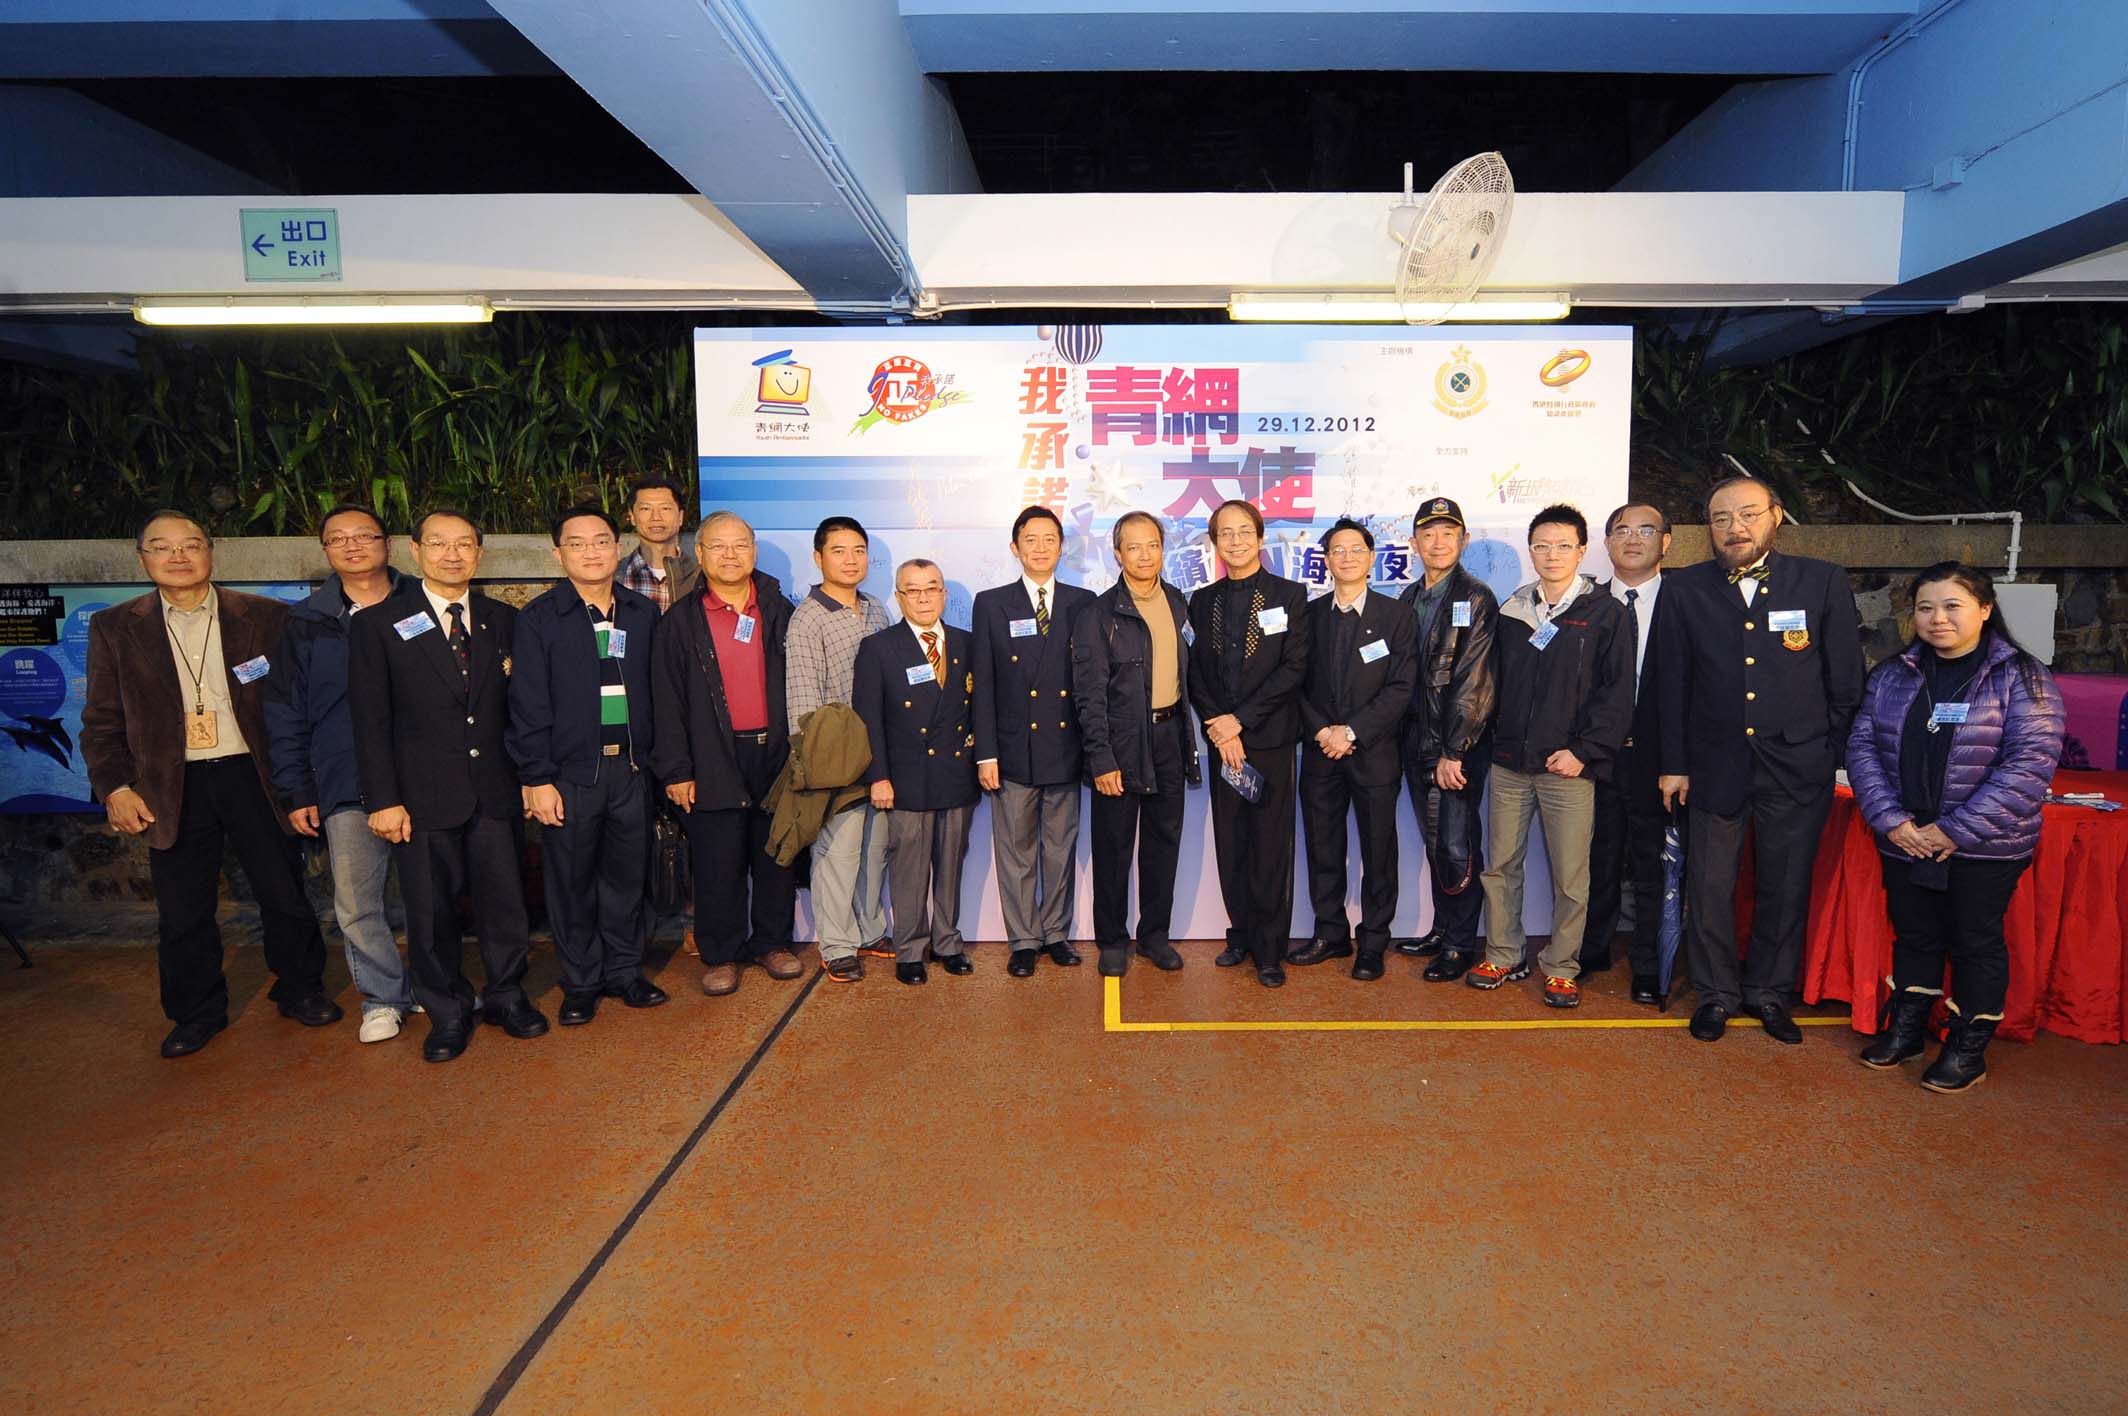 The Director of Intellectual Property, Mr Peter Cheung (seventh right), and the Acting Deputy Commissioner of Customs and Excise, Mr Tam Yiu-keung (eighth right), with 11 youth uniform group leaders in the event.